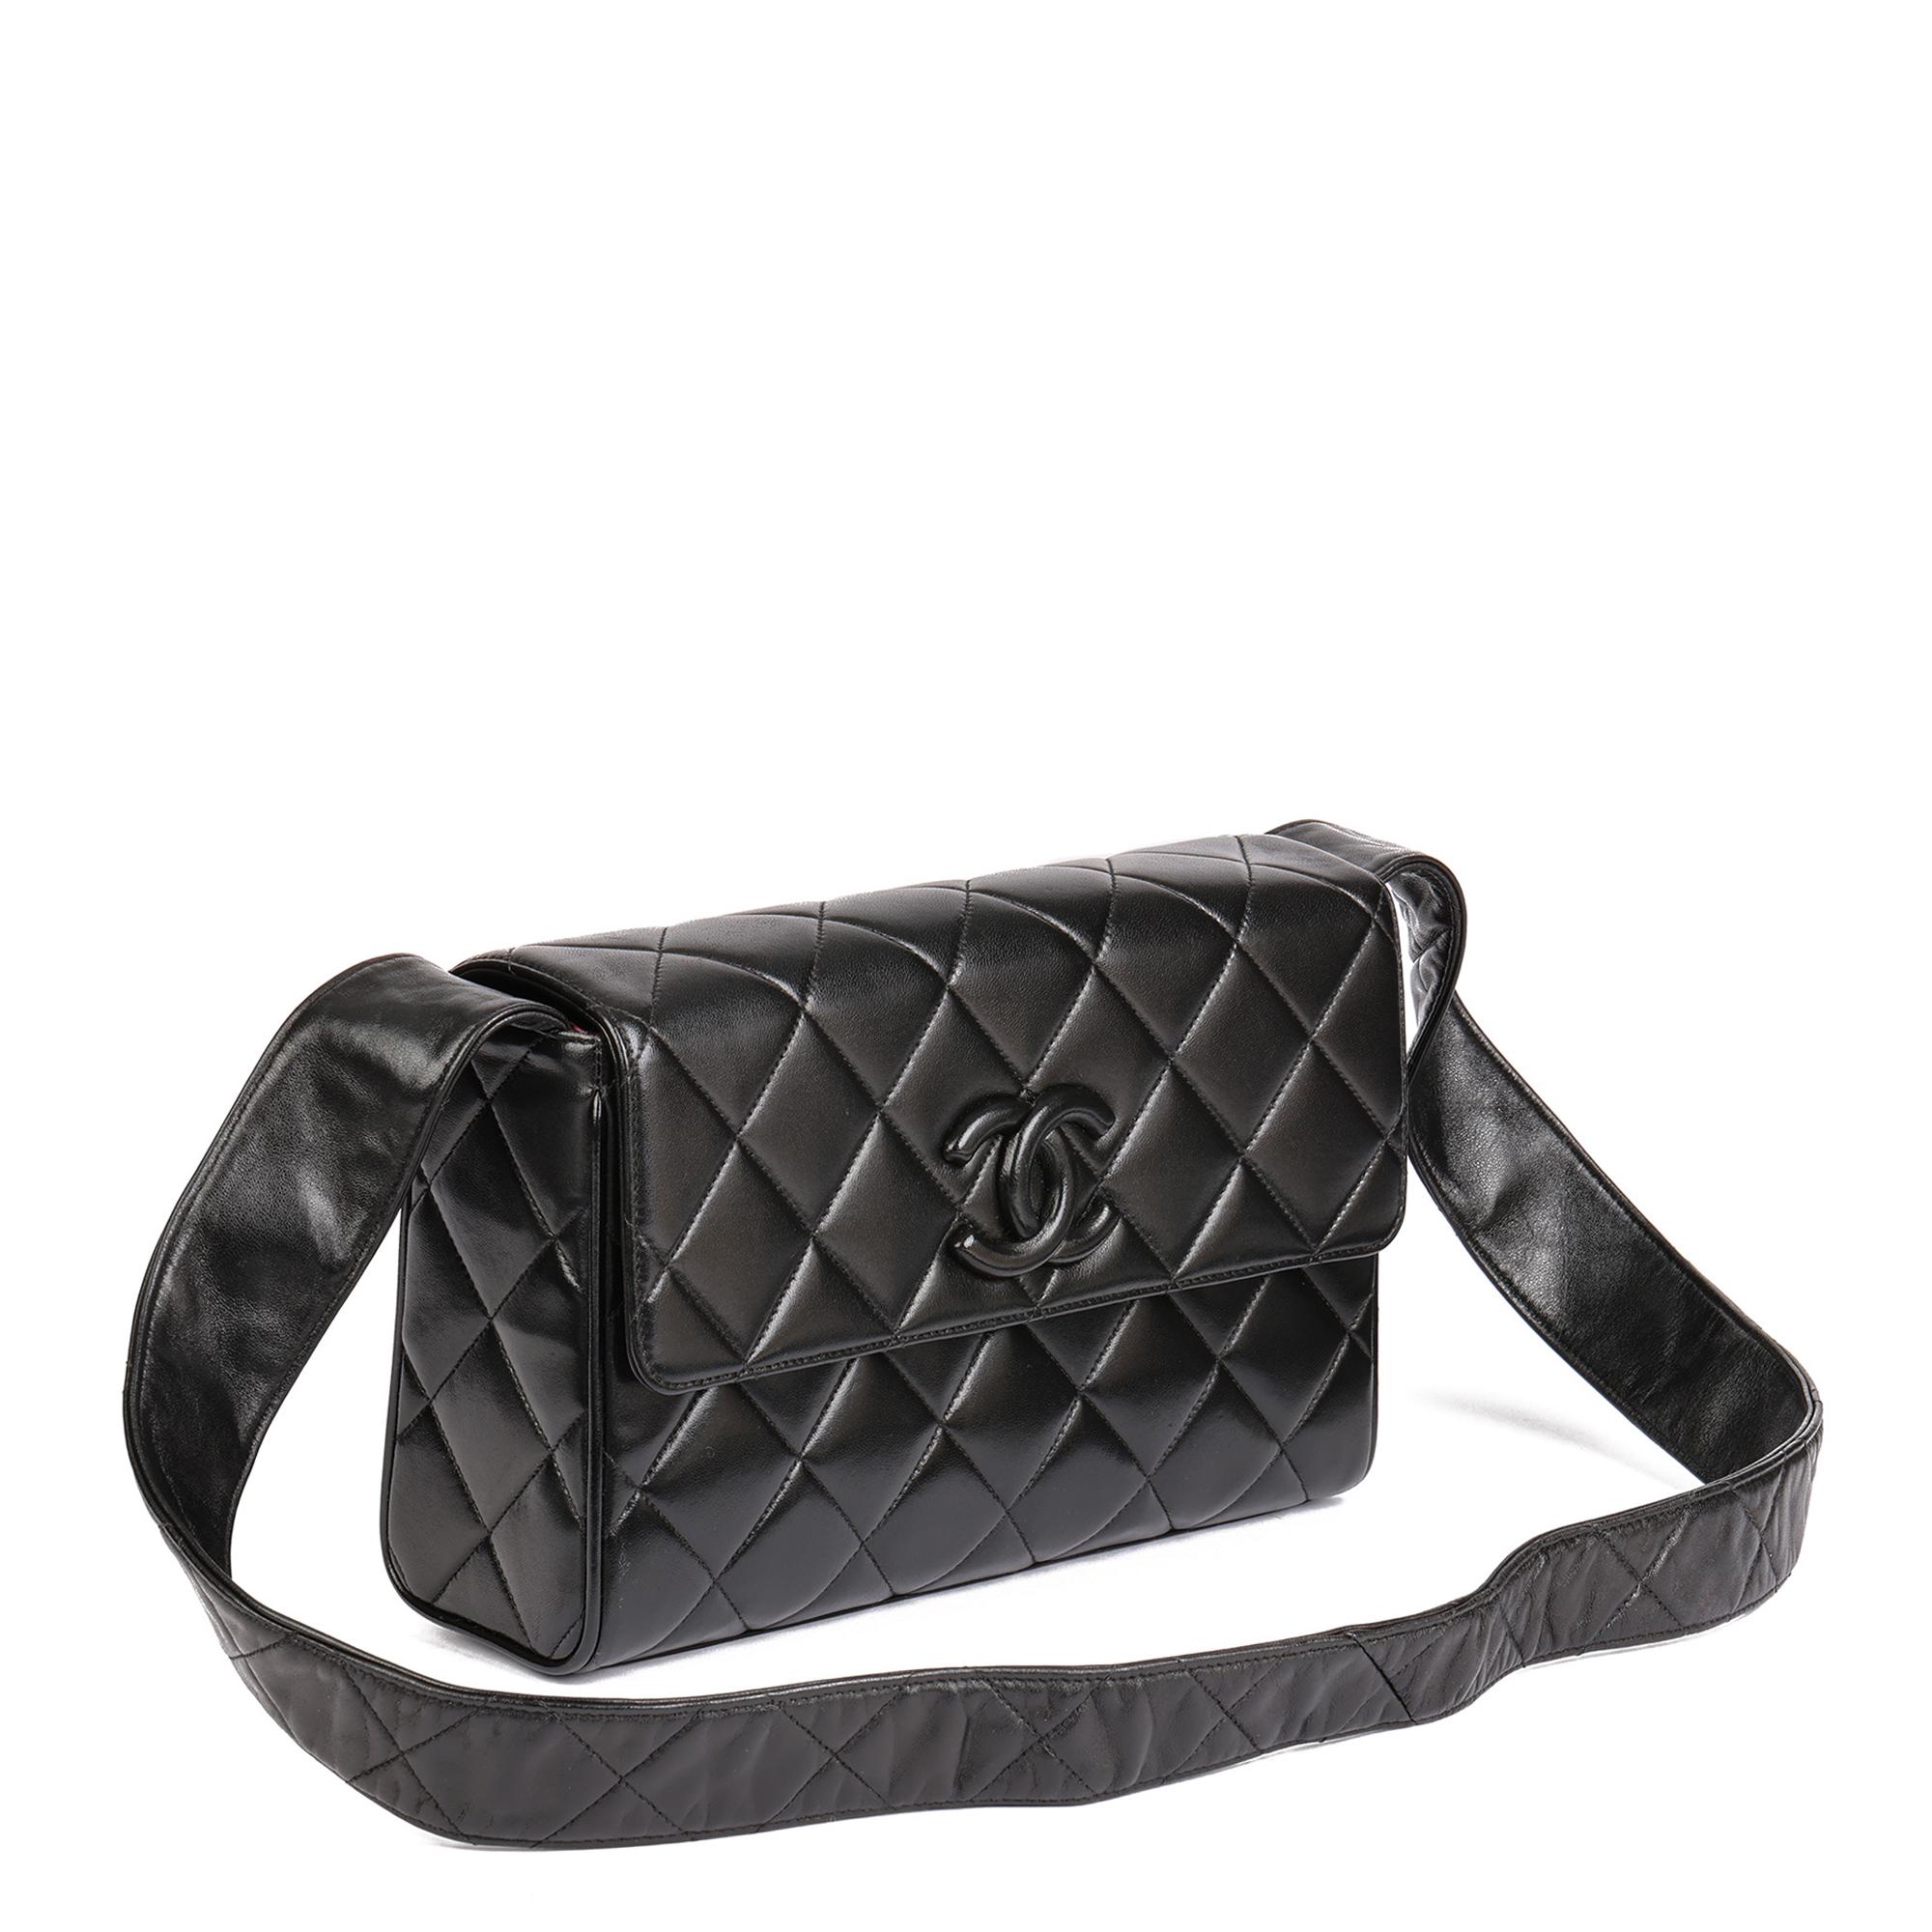 CHANEL
Black Quilted Lambskin Vintage Medium Leather Logo Flap Bag 

Xupes Reference: HB4616
Serial Number: 2691885
Age (Circa): 1992
Accompanied By: Chanel Dust Bag, Authenticity Card
Authenticity Details: Authenticity Card, Serial Sticker (Made in